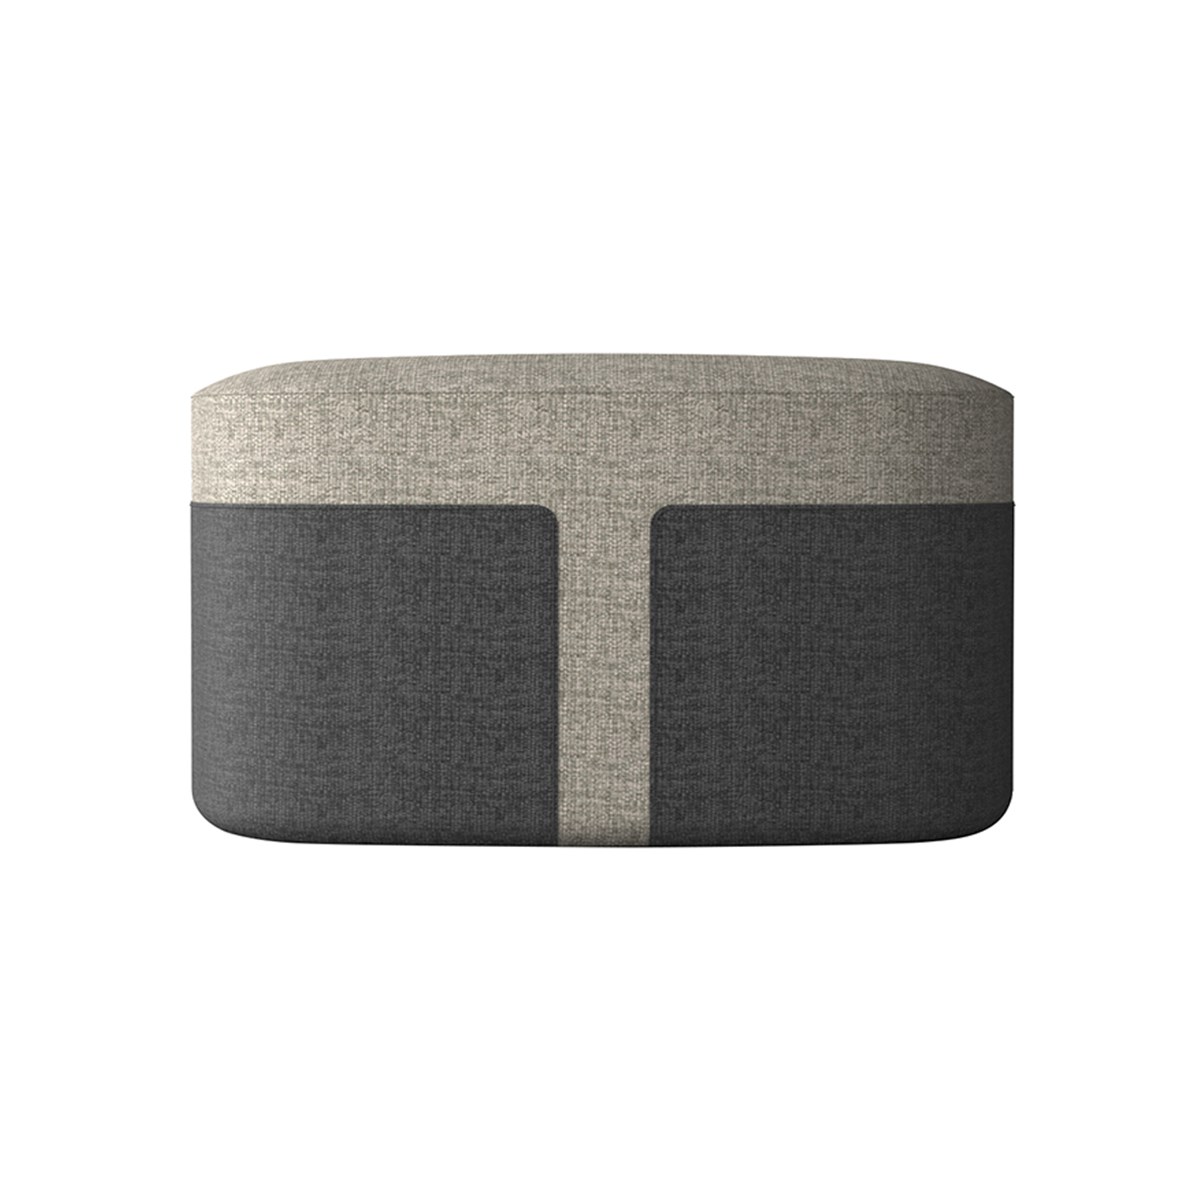 Neospace-Handy-Pouf-Contract-Matisse-2